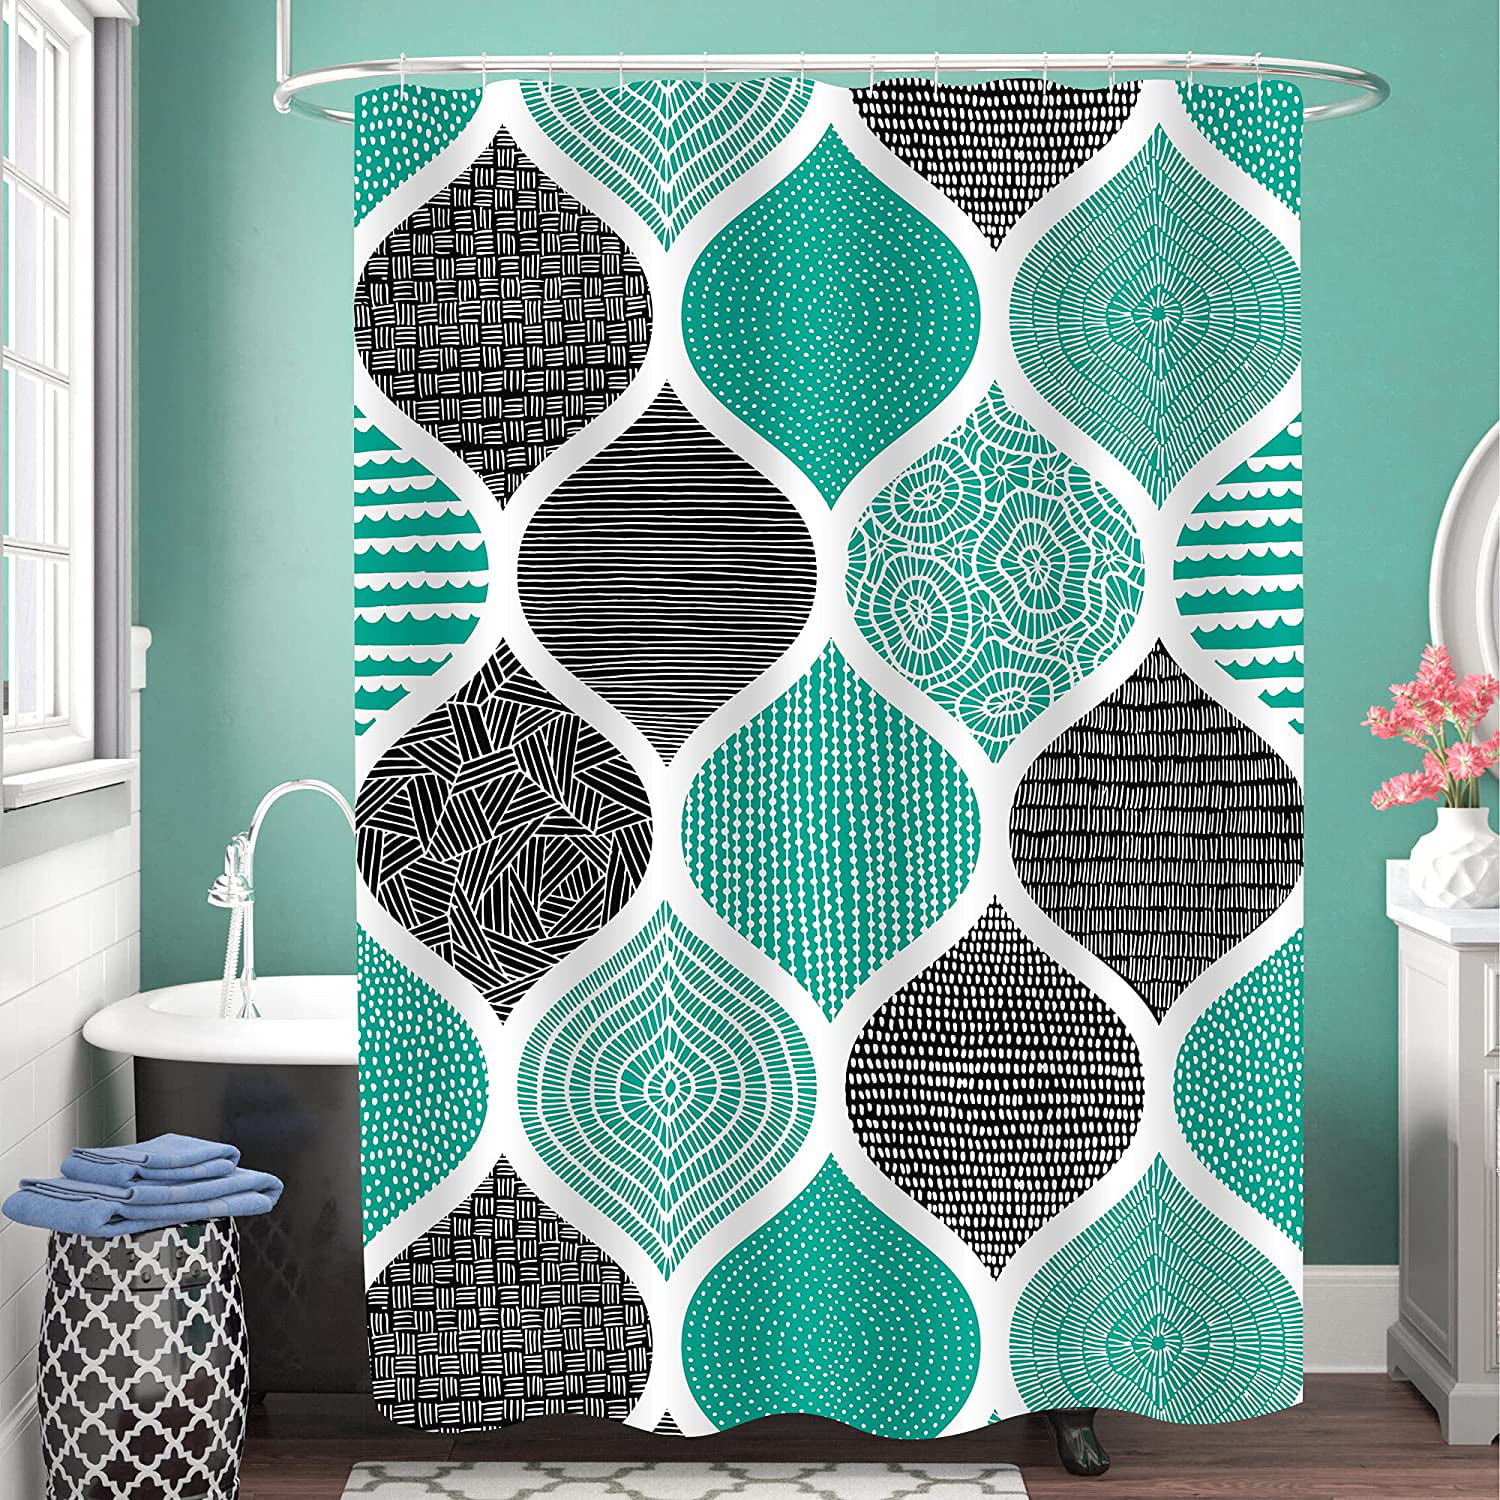 Small Stall Shower Curtain Liner 36 x 72 Teal Half Size Shower Curtain ...